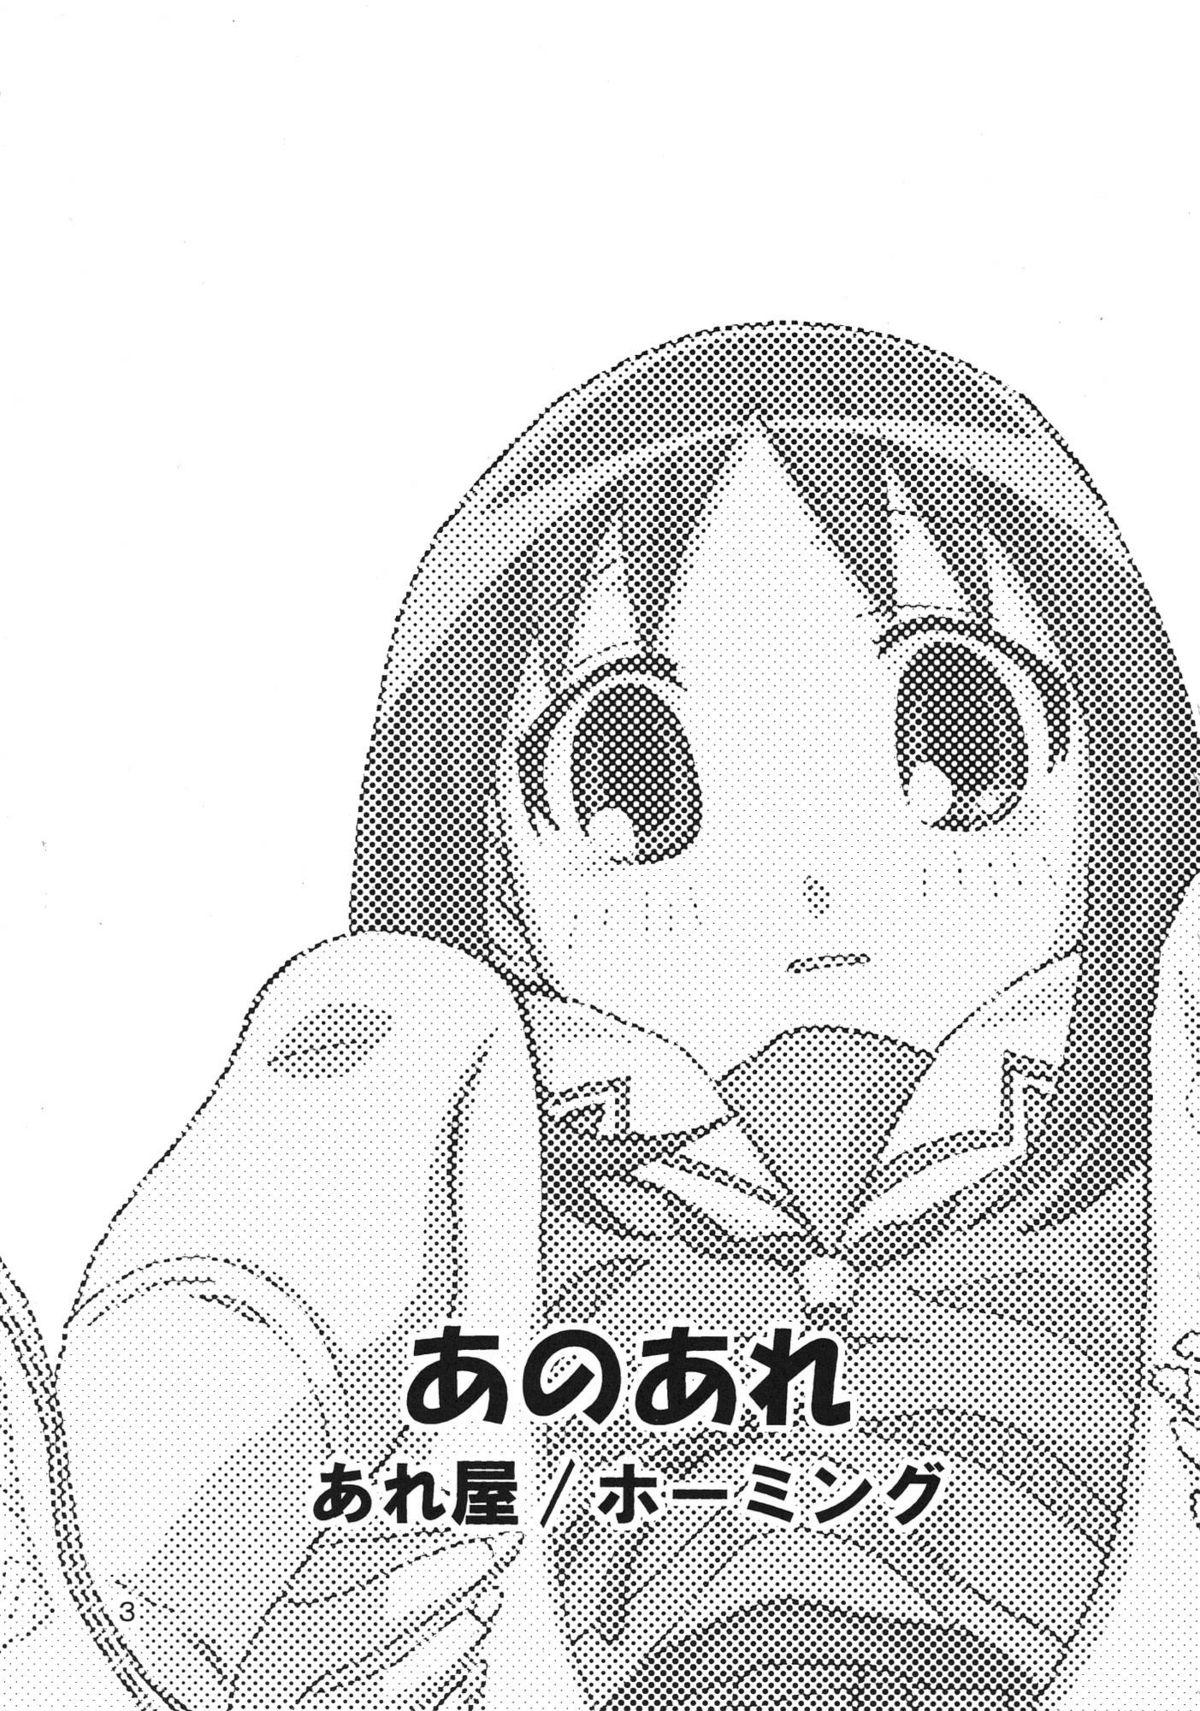 Amature Sex Tapes Ano-Are - Azumanga daioh Cut - Page 3